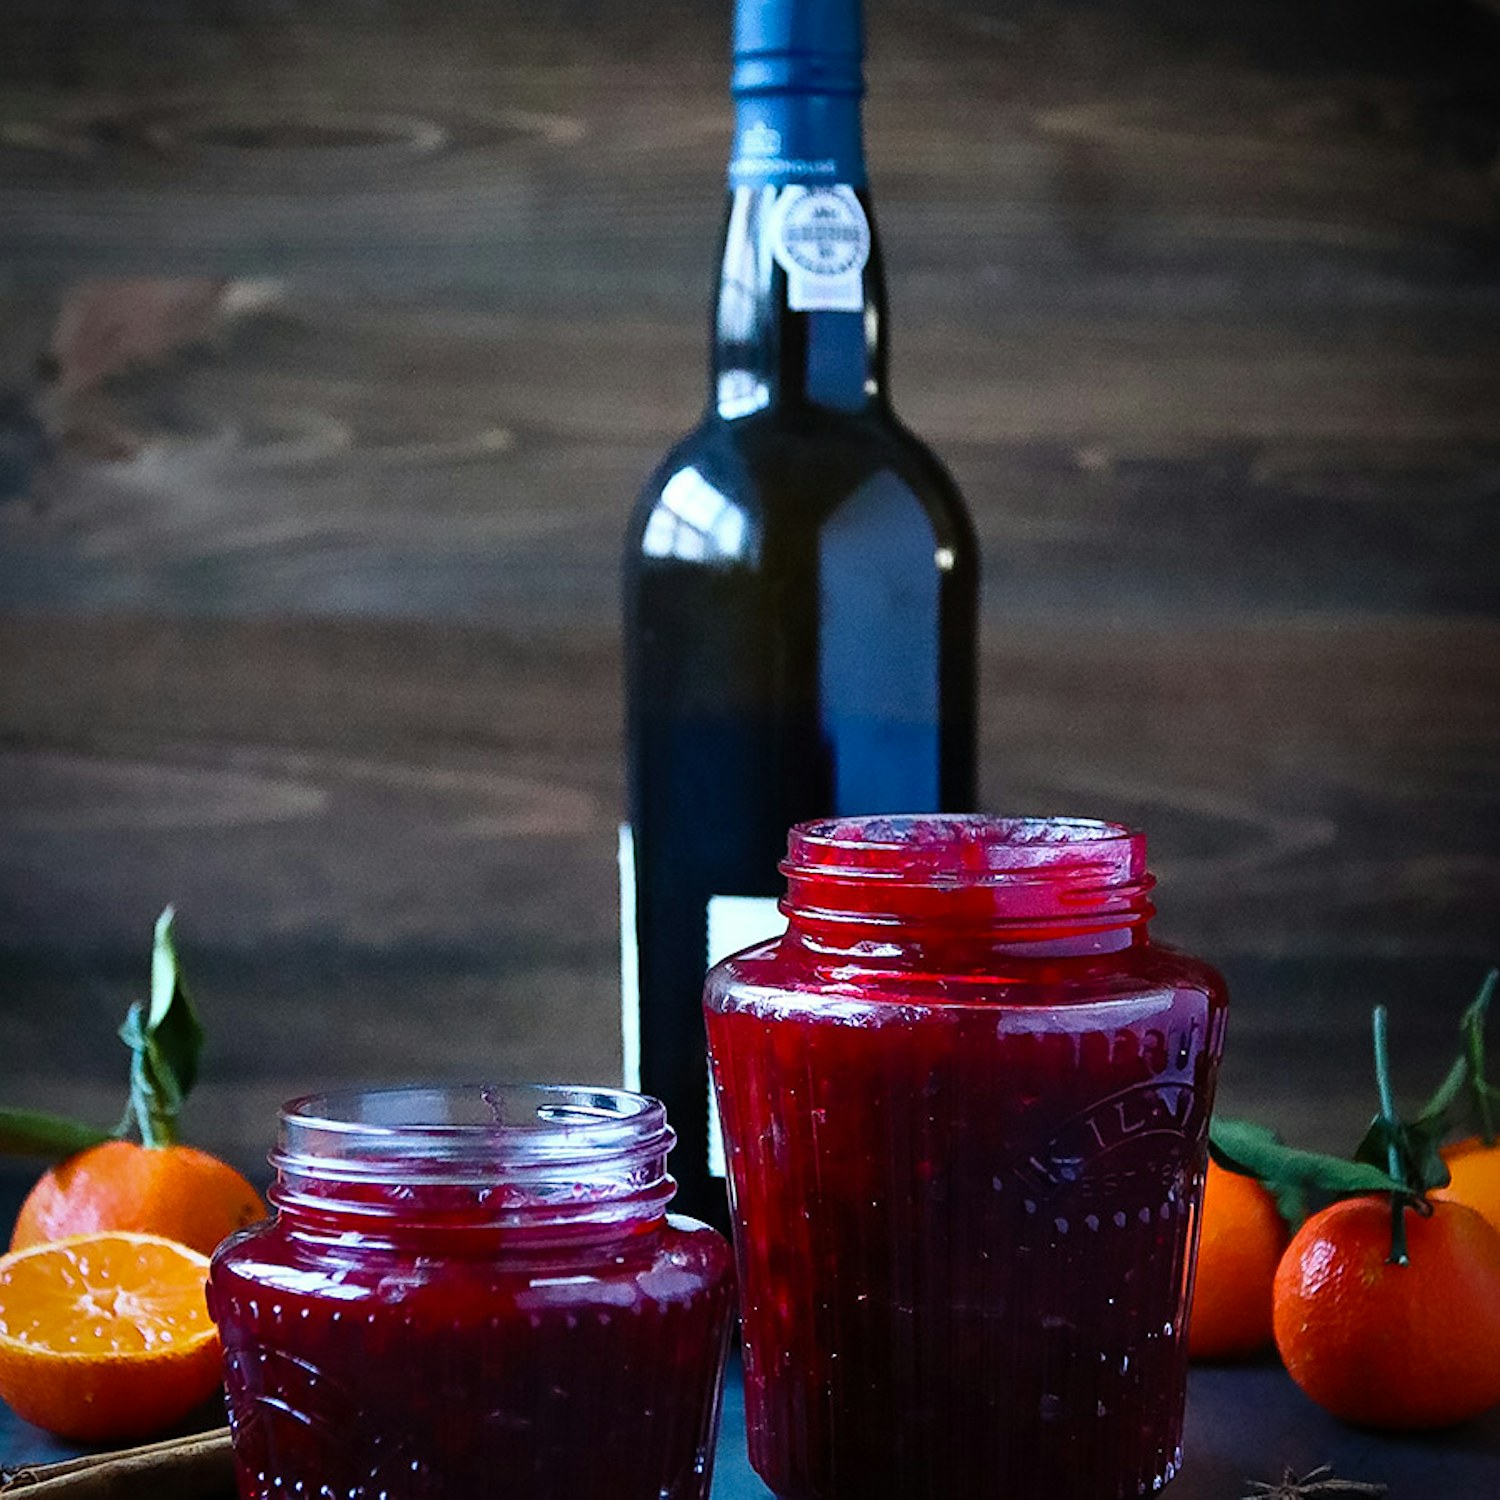 Cranberry Port and Clementine sauce